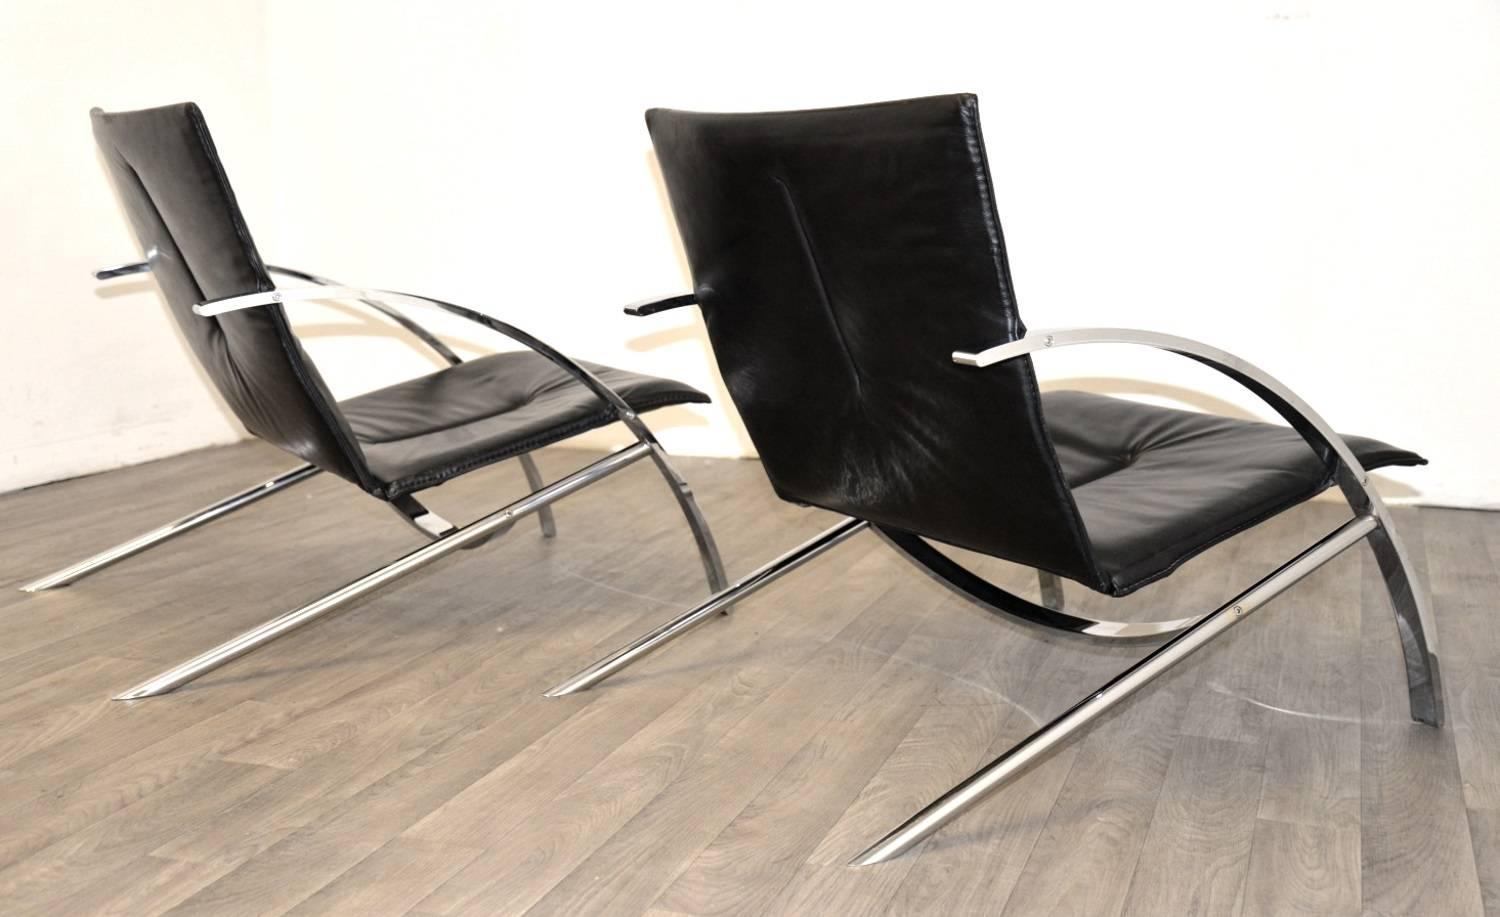 Paul Tuttle Arco Lounge Chairs for Strässle of Switzerland, 1970s In Good Condition For Sale In Fen Drayton, Cambridgeshire